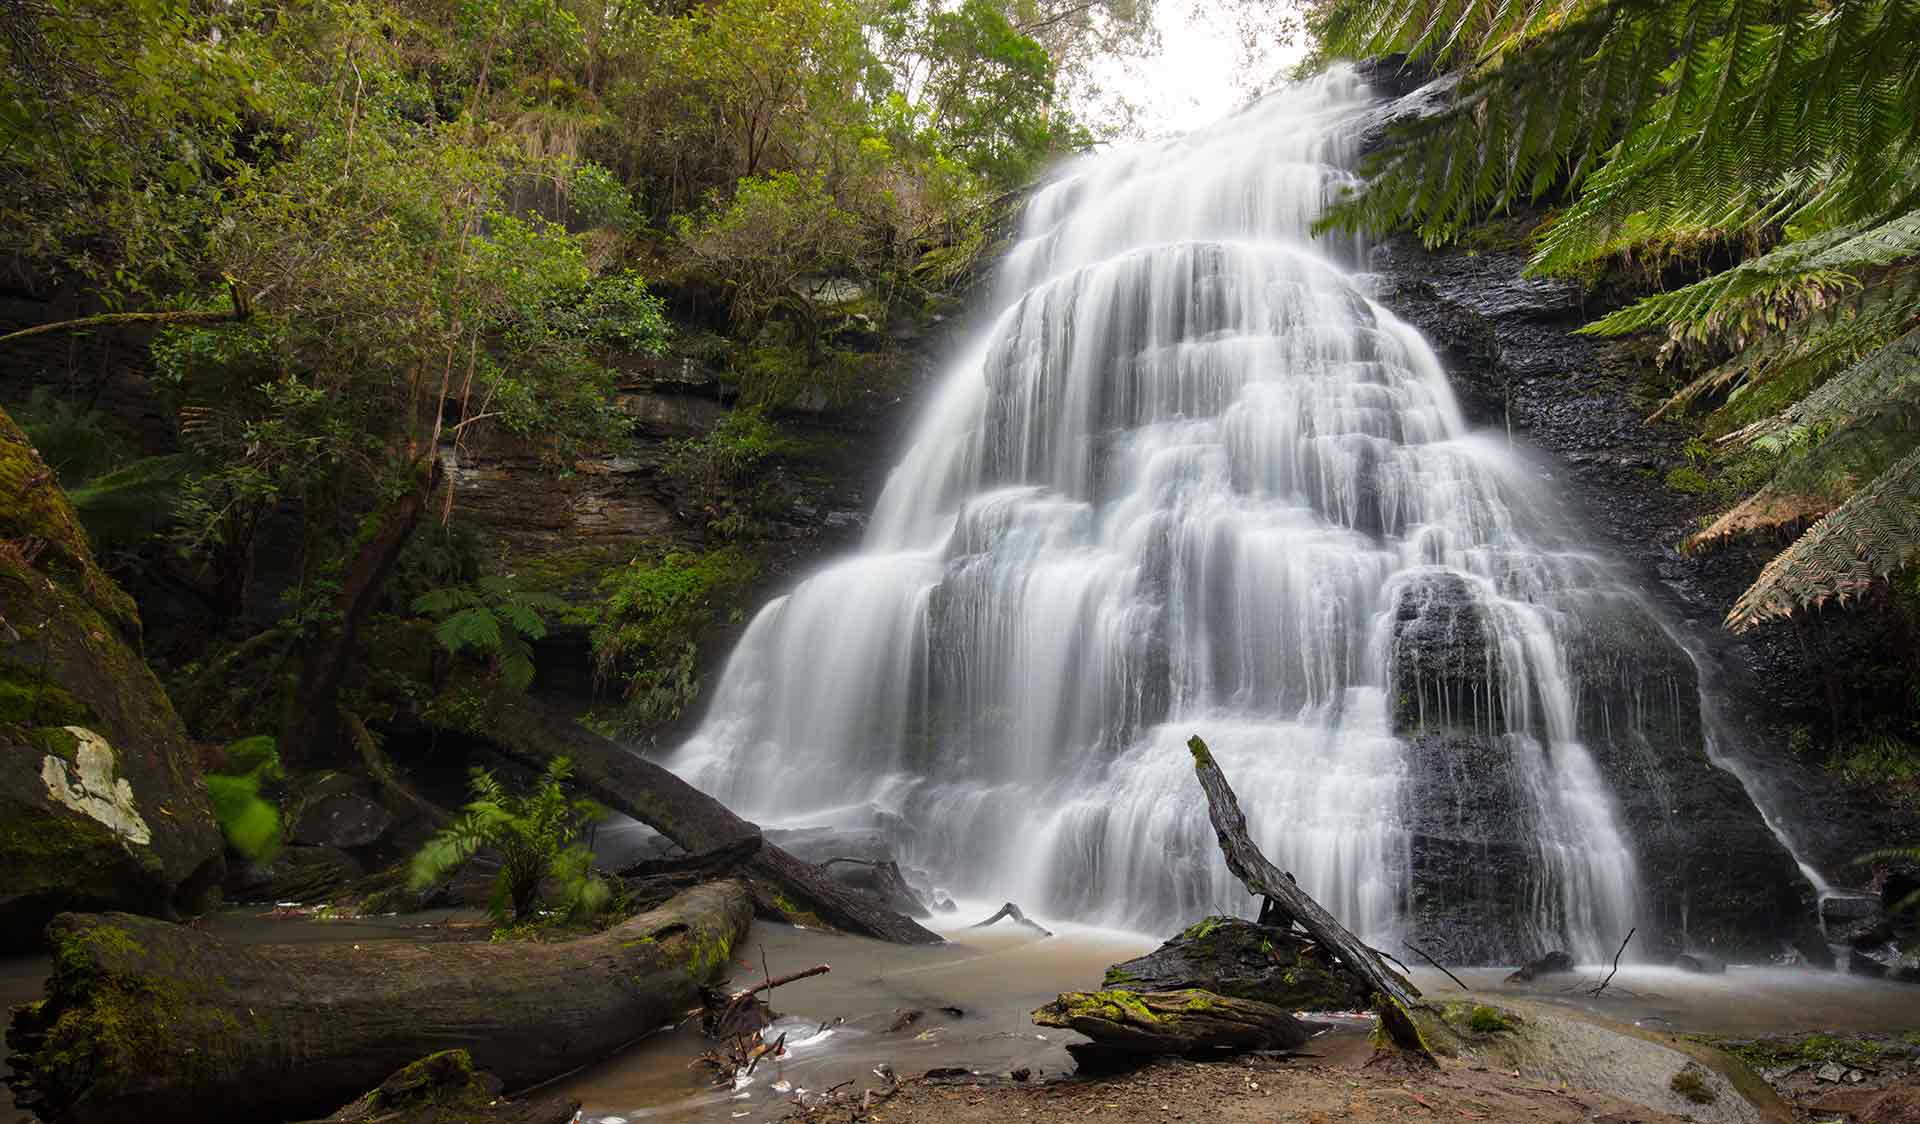 Henderson Falls near Sheoak Picnic Area at Lorne in the Great Otway National Park